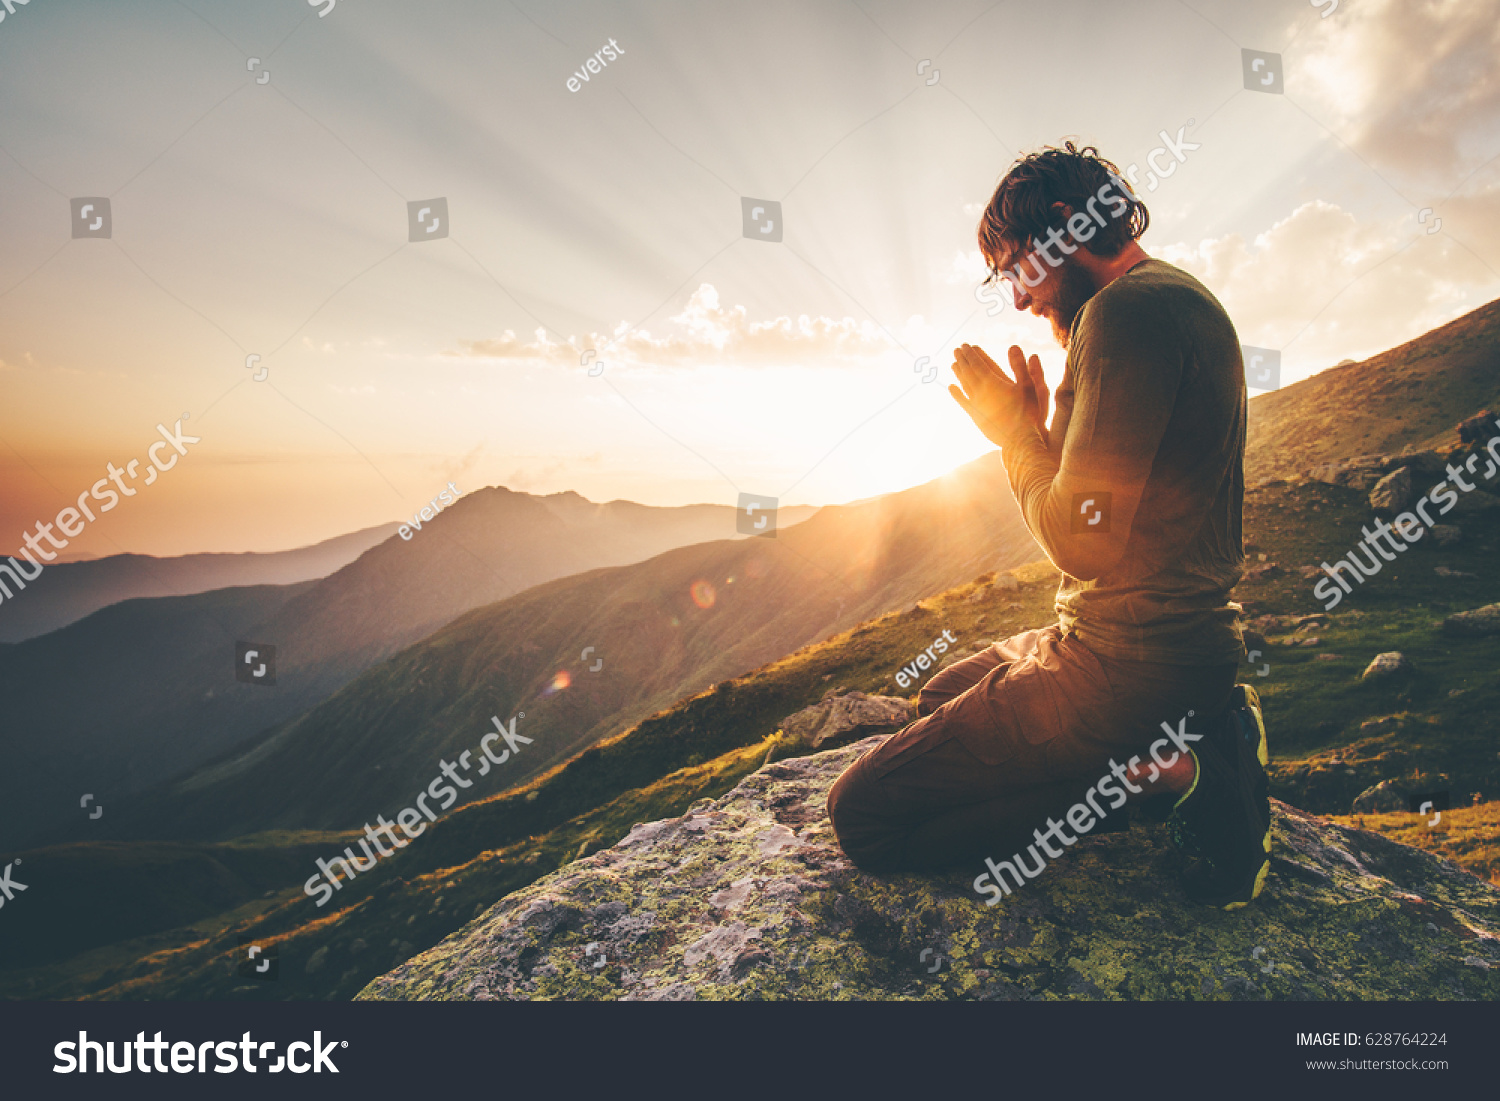 Man praying alone at sunset mountains Travel Lifestyle spiritual relaxation emotional concept vacations outdoor harmony with nature landscape #628764224